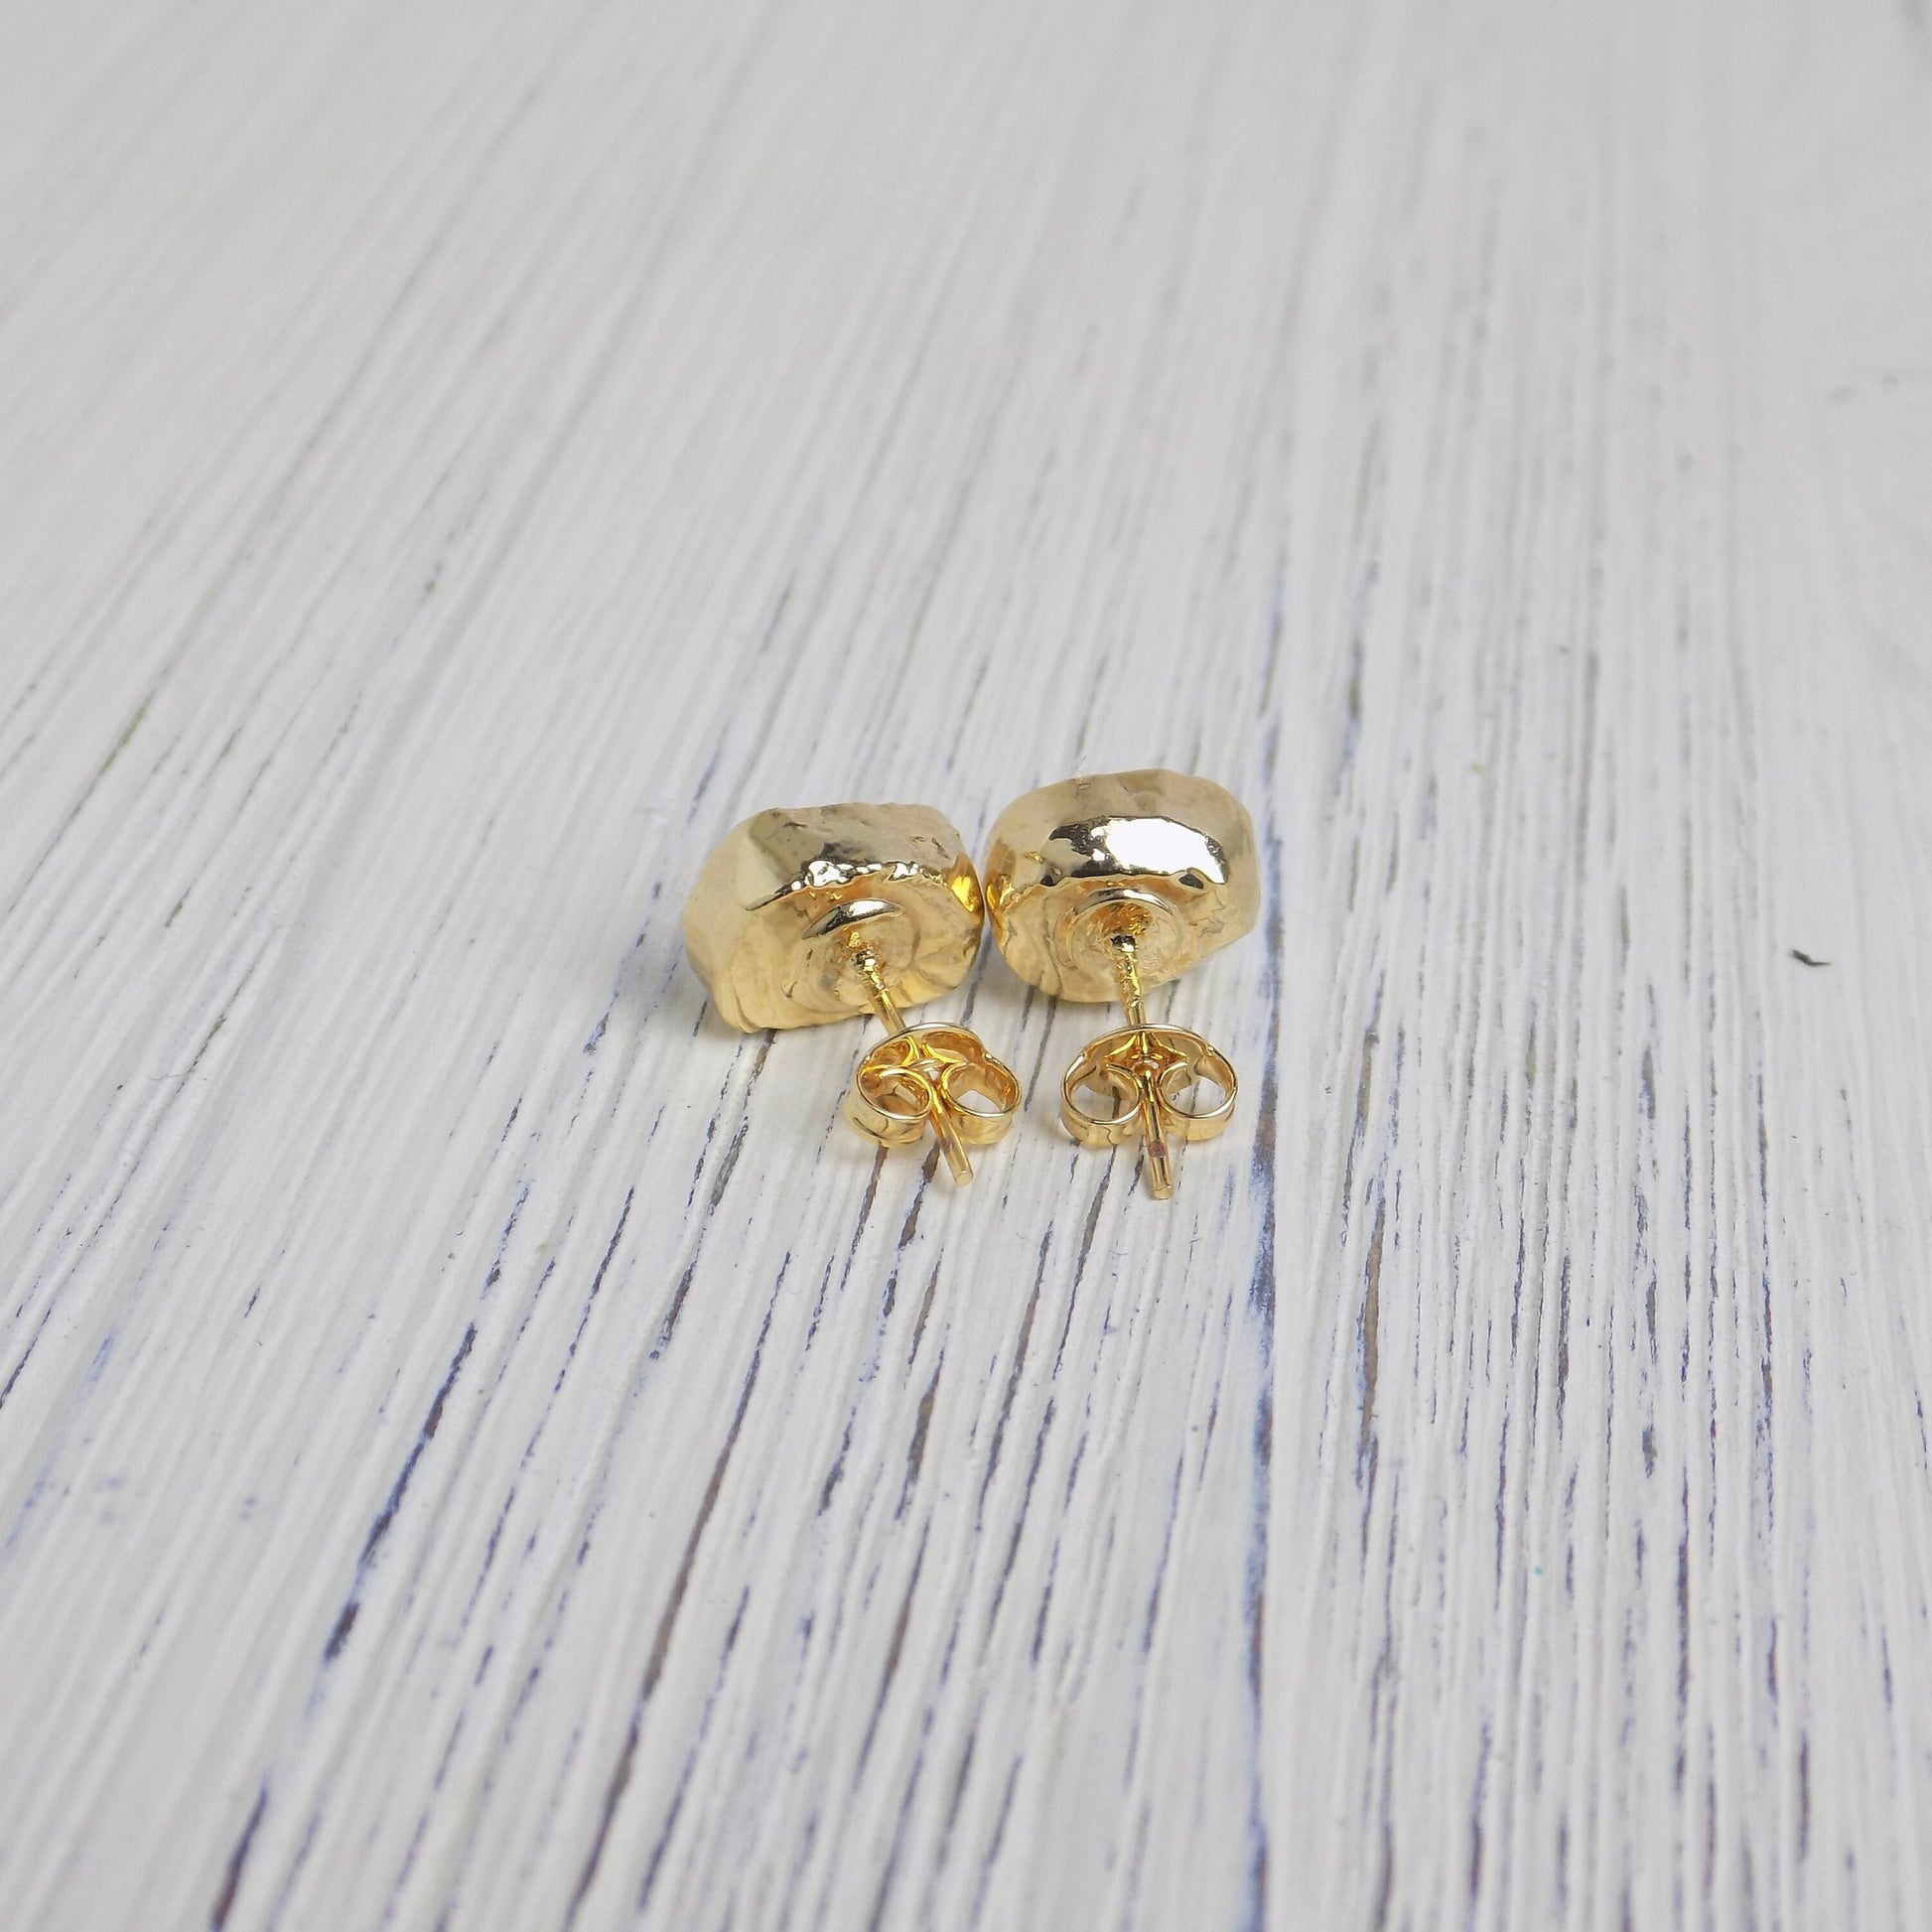 Unique Gifts, Geode Earrings Stud, Natural Gemstone Posts, Sparkly Druzy Earring Drussy, Small Stone Gold, G14-218